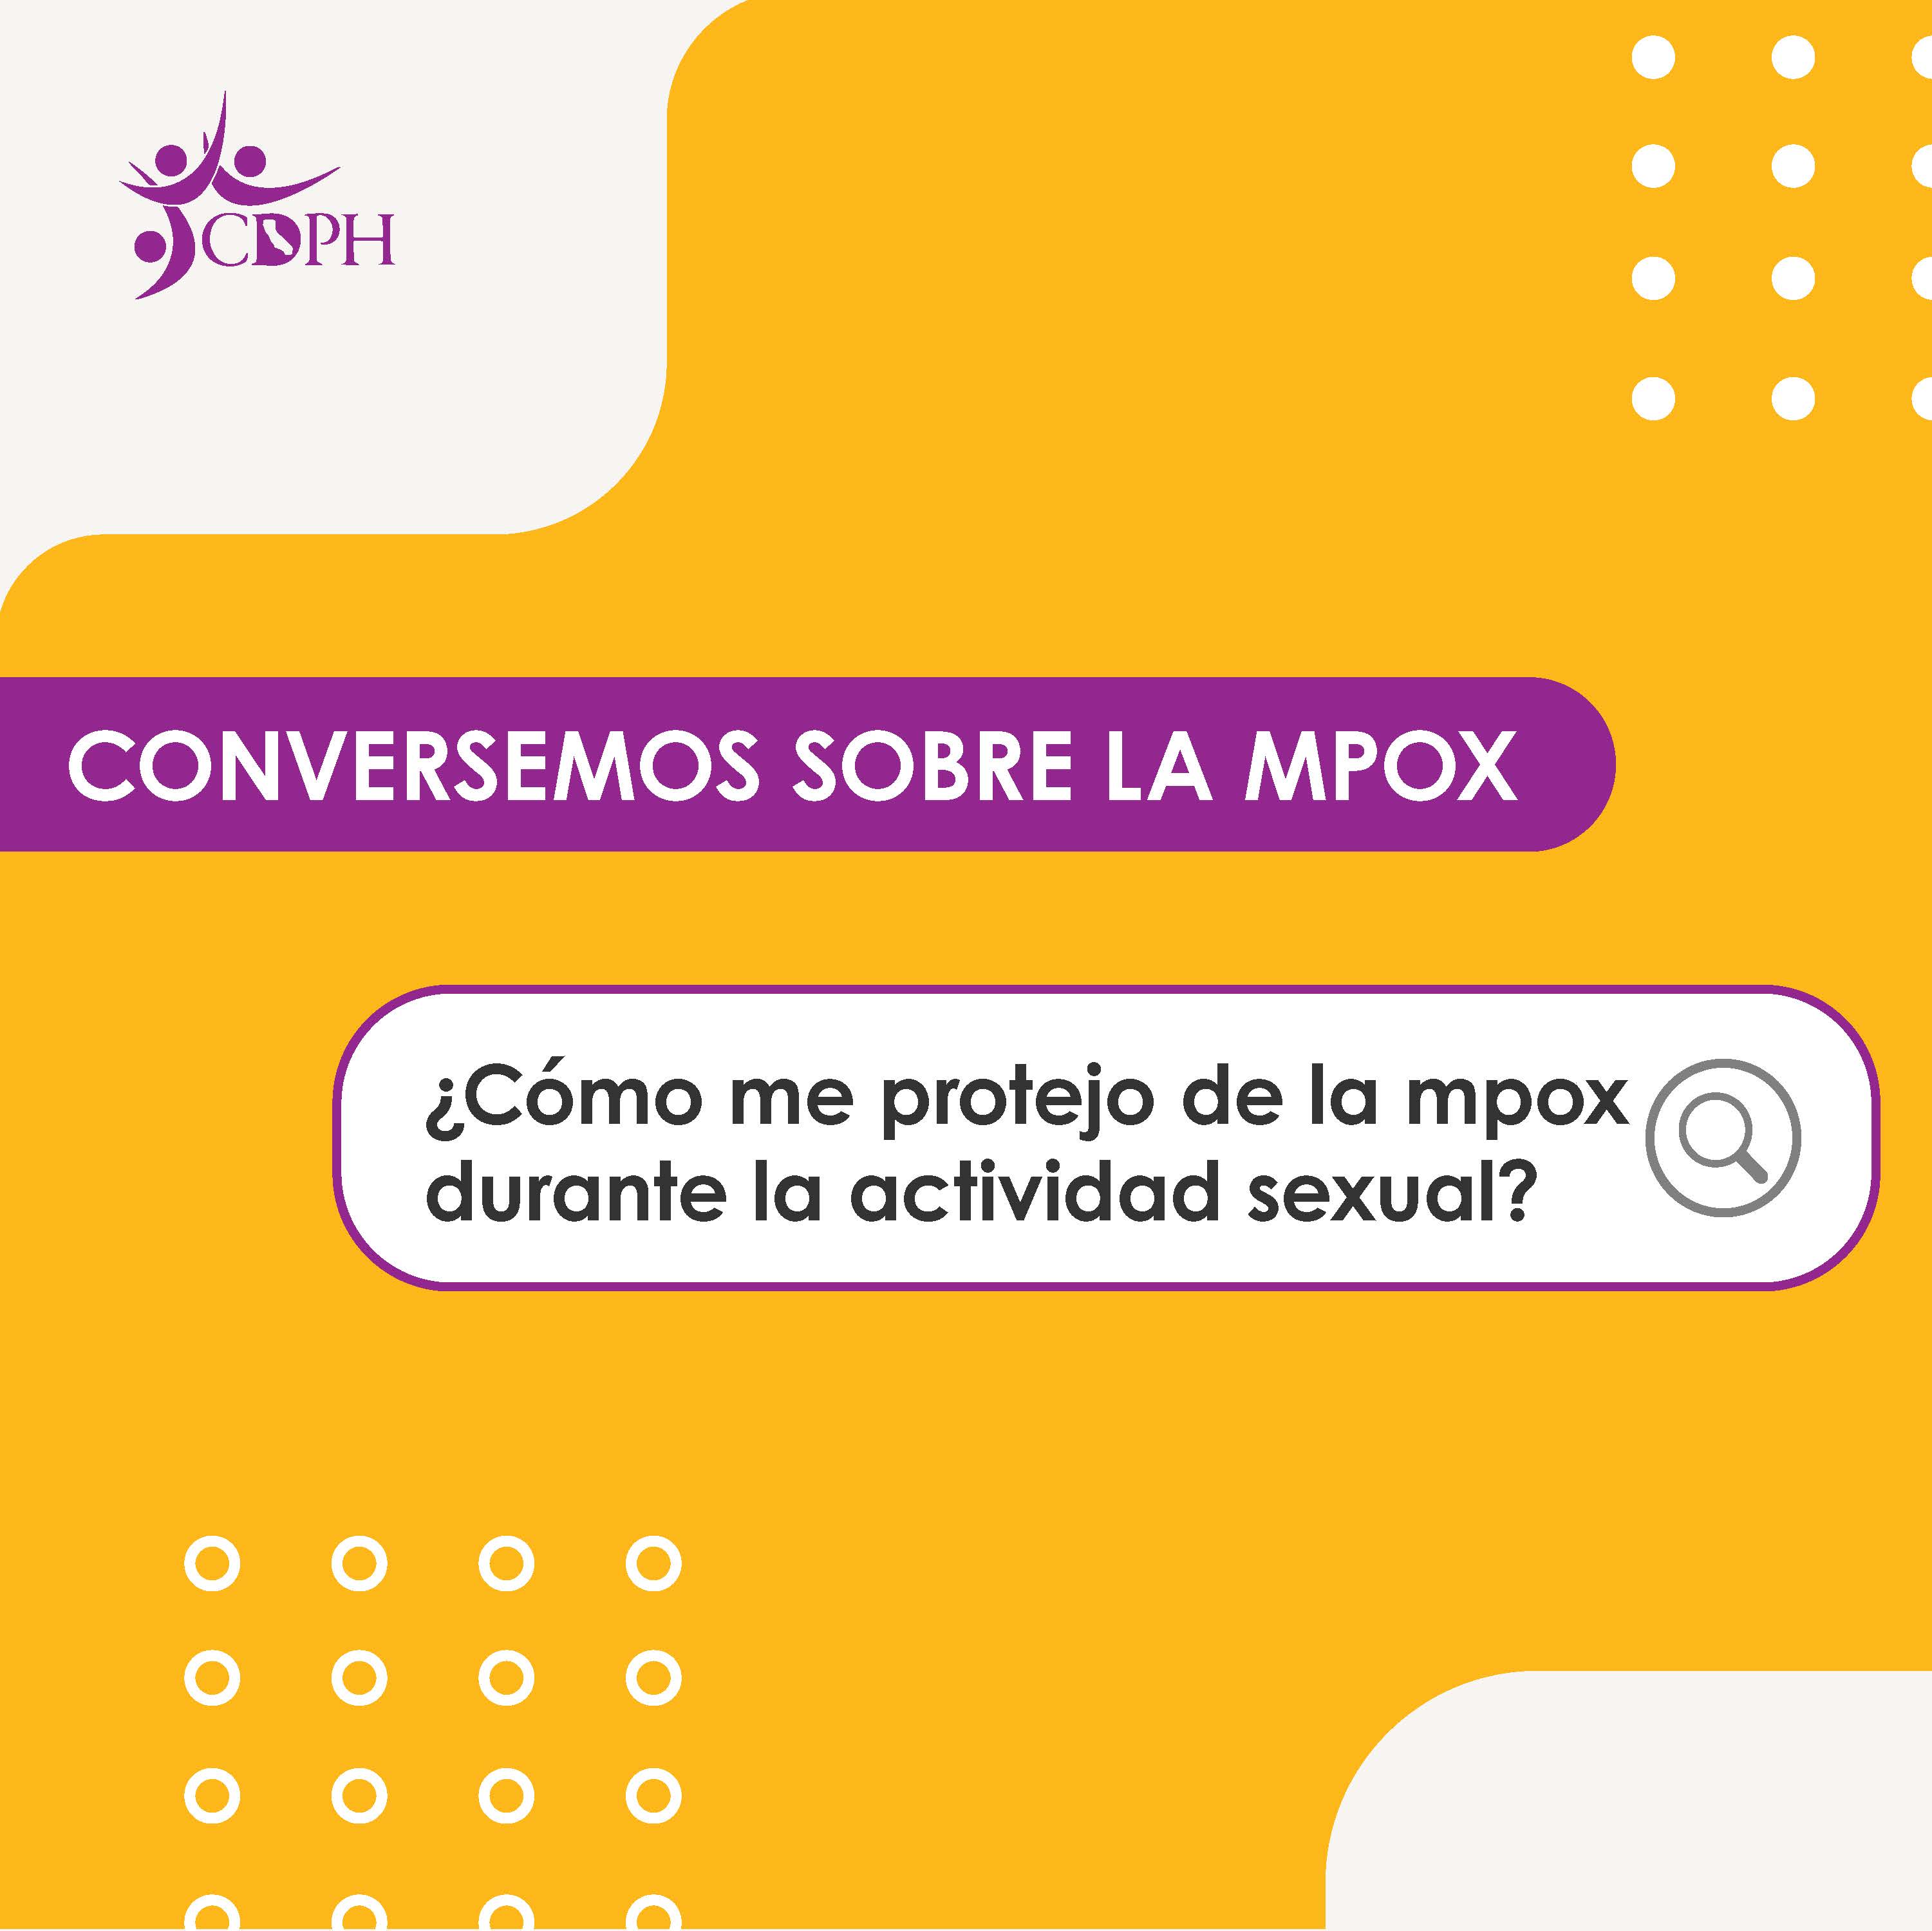 How do I protect myself from MPX during sexual activity?